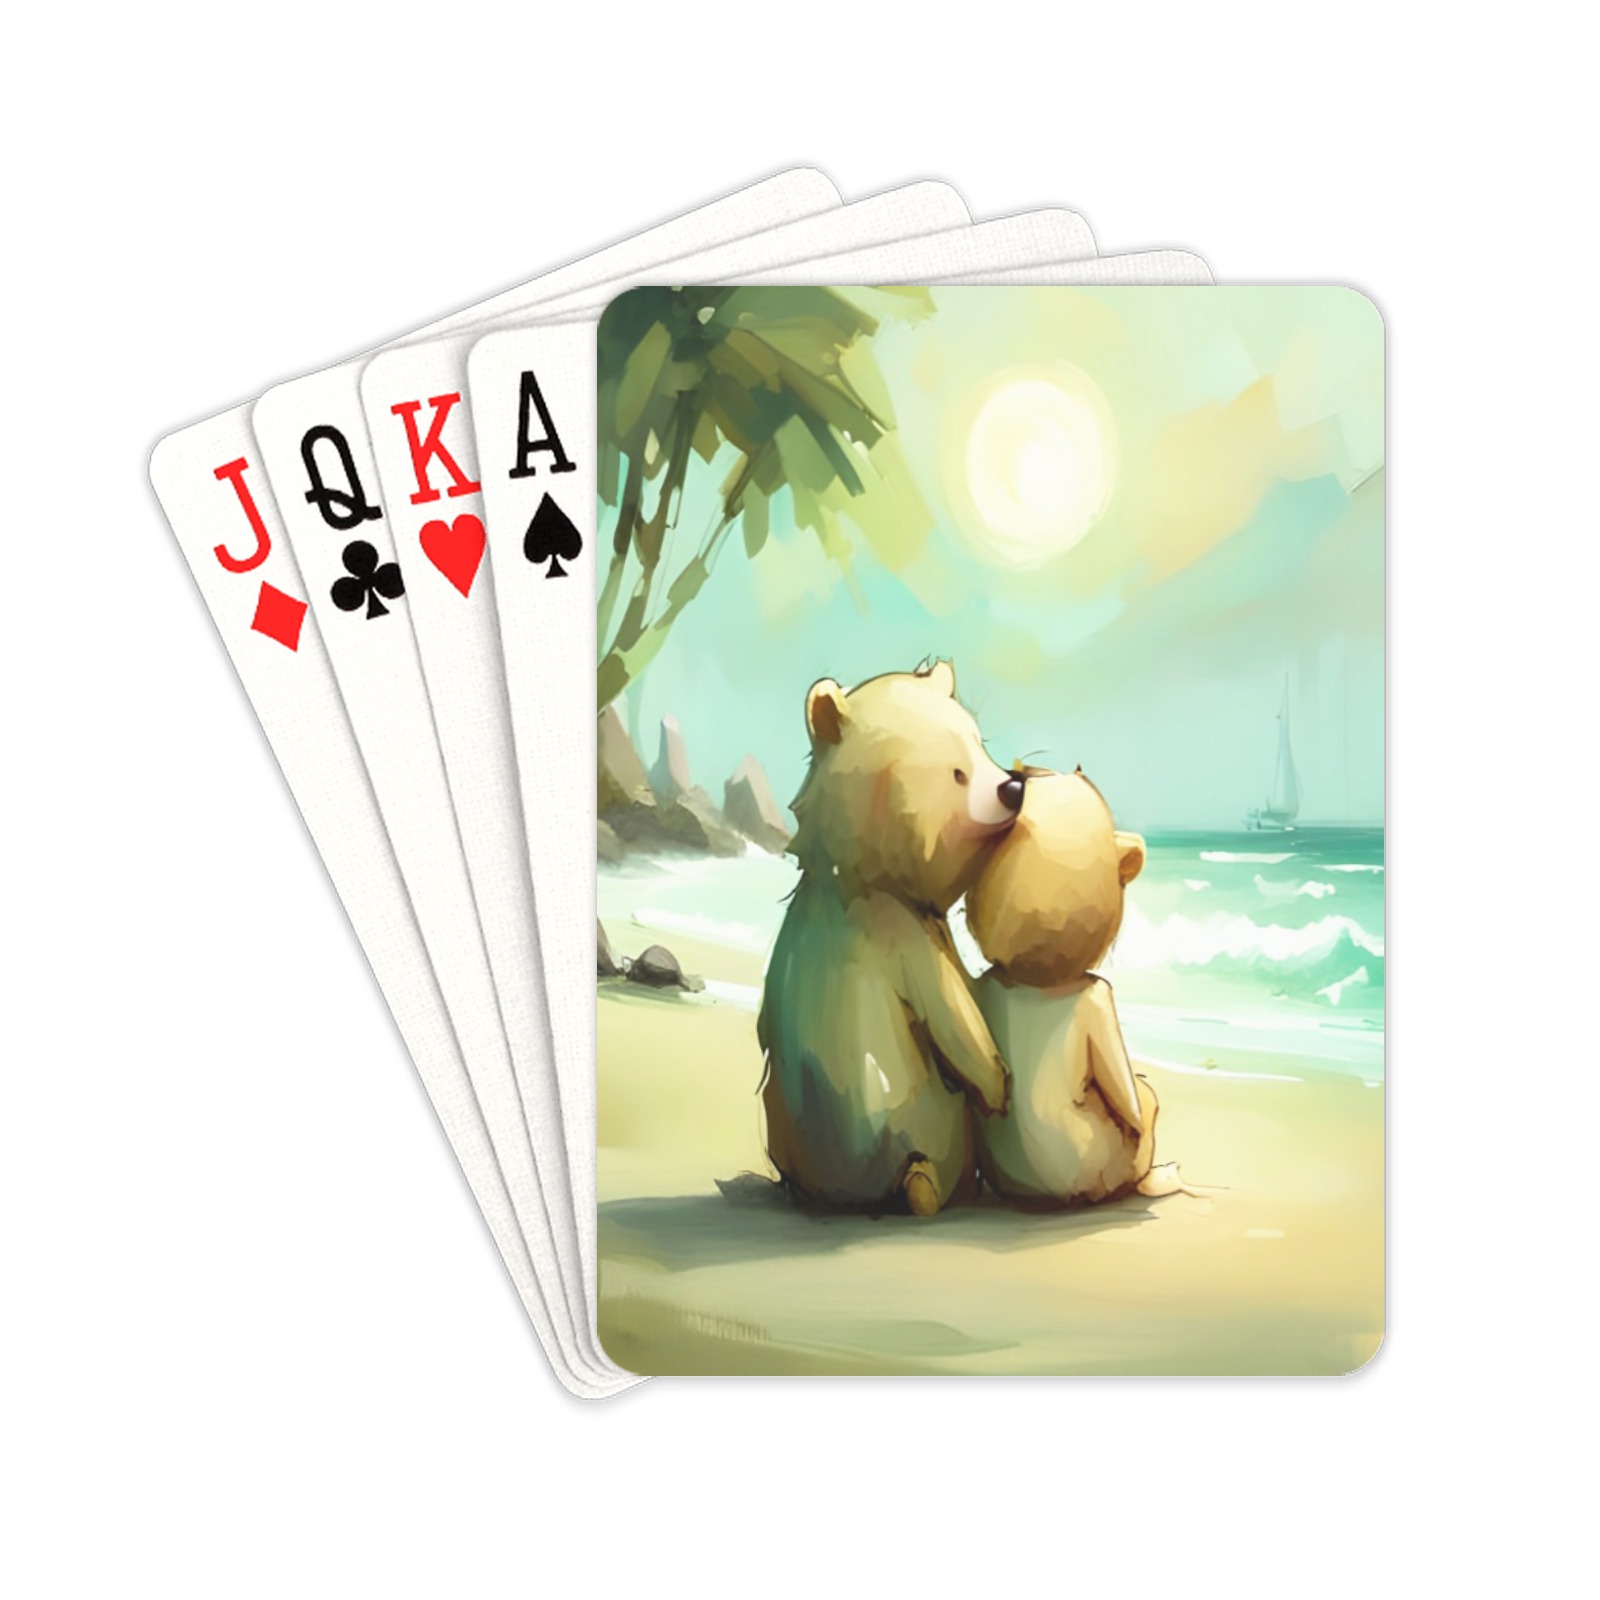 Little Bears 7 Playing Cards 2.5"x3.5"